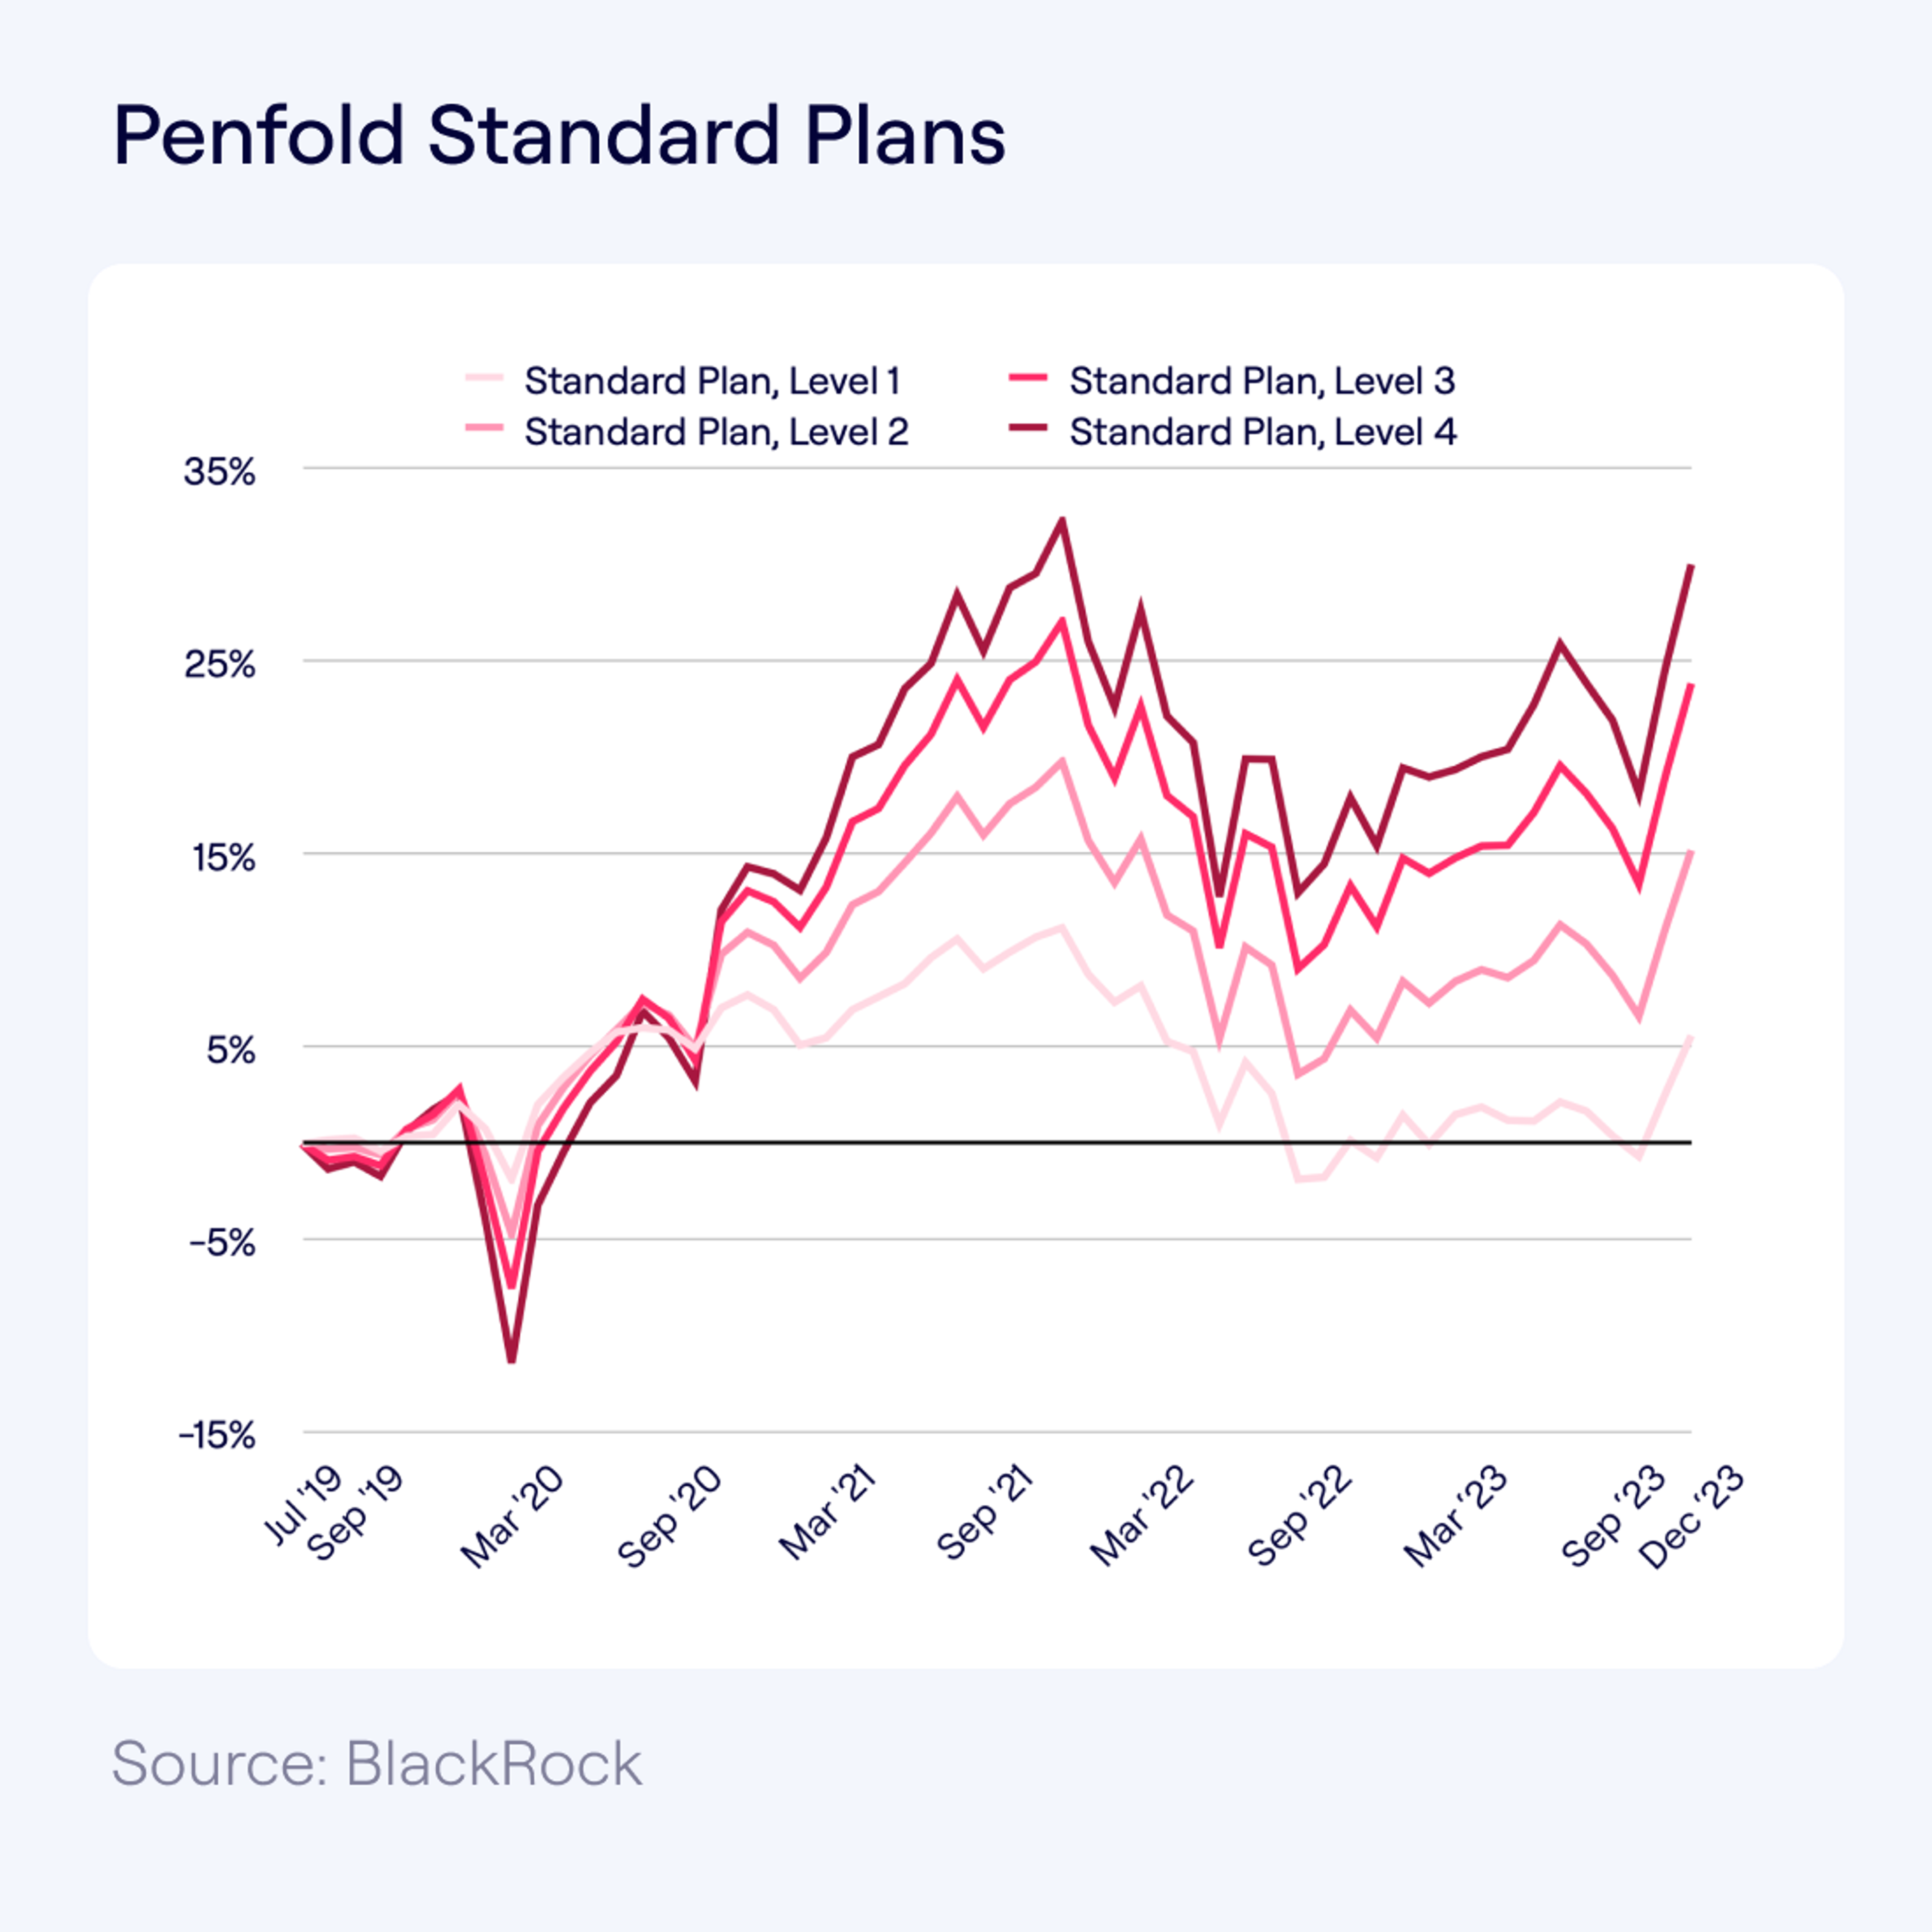 Line graph titled "Penfold Standard Plans," showing the performance of four levels of standard investment plans from July 2019 to December 2023. The lines depict fluctuations with a general upward trend in recent months.